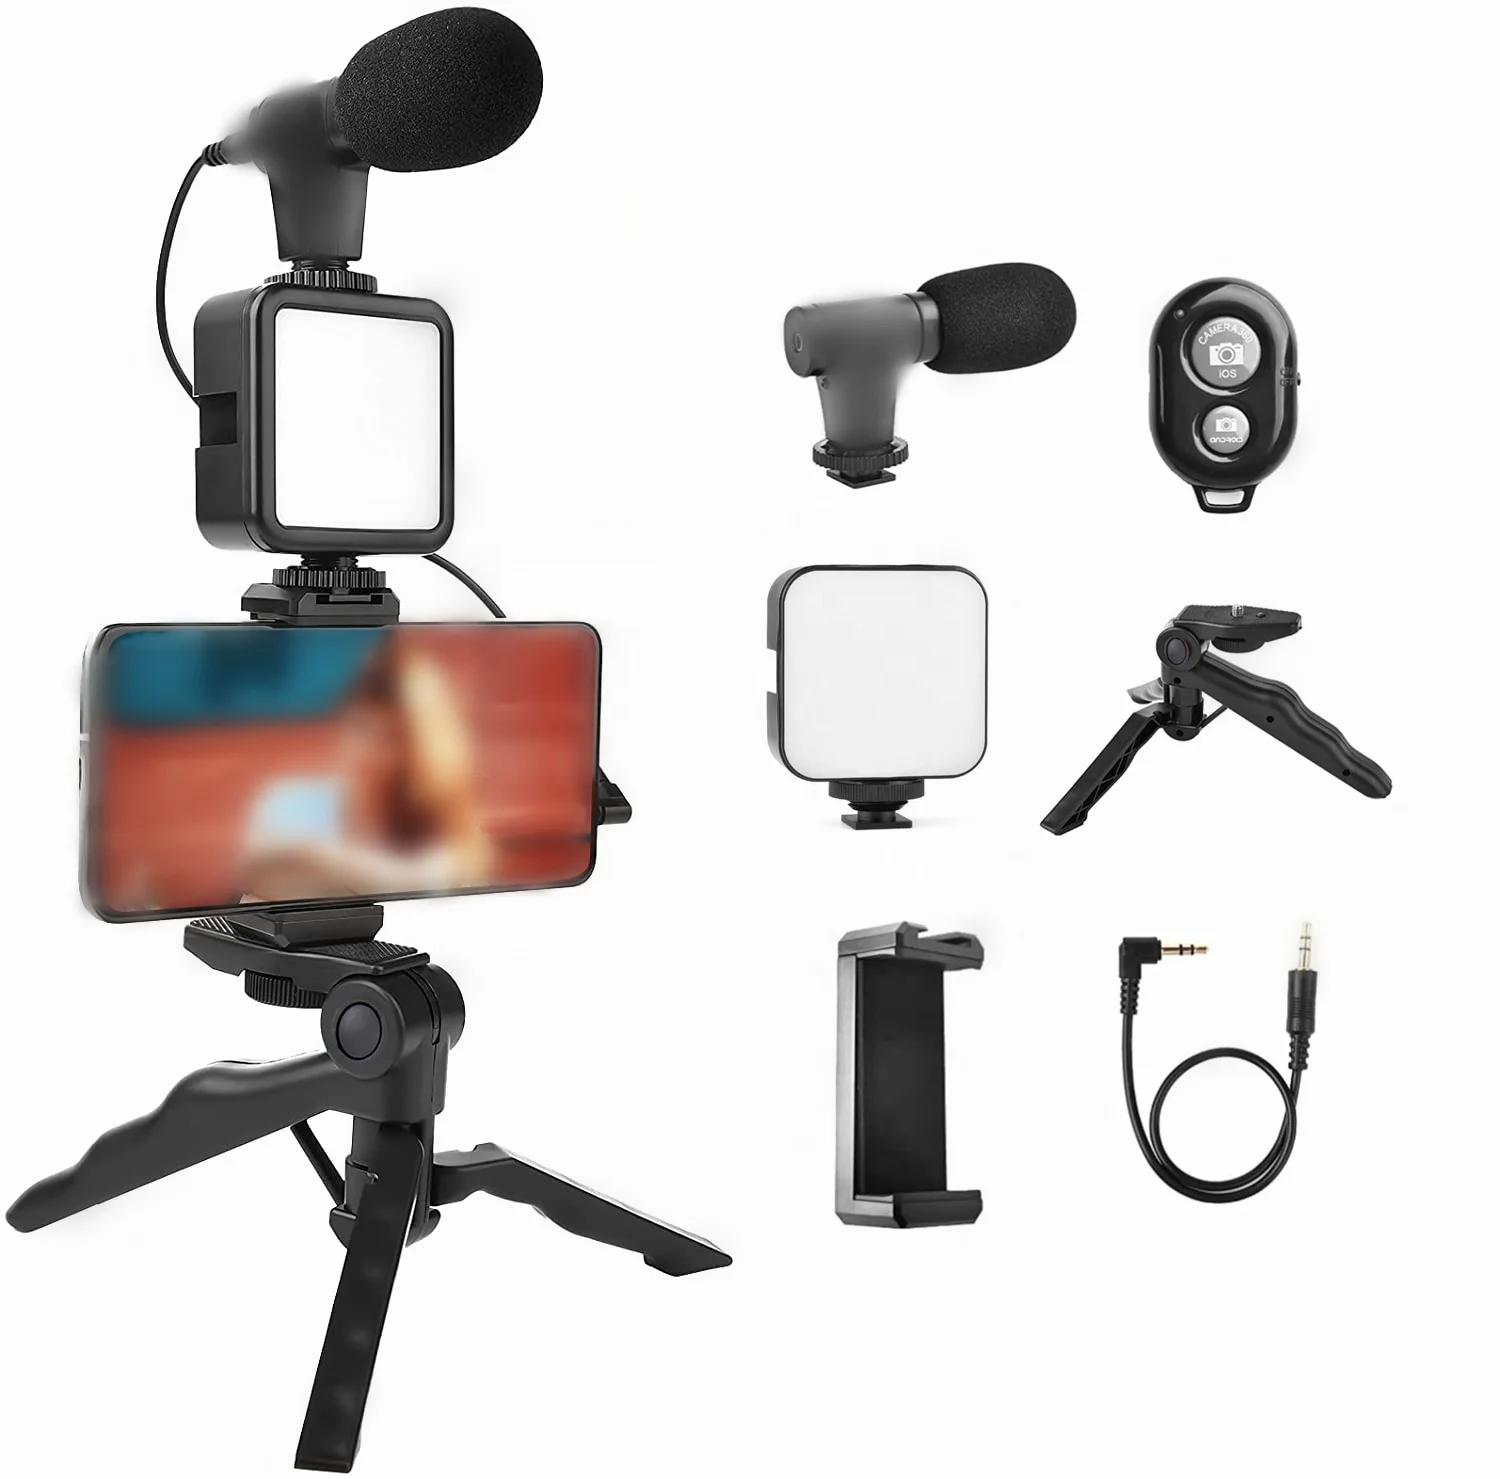 

All-In-One Smartphone Vlogging Video Light Kit with Shotgun Microphone Phone Holder and Tripod